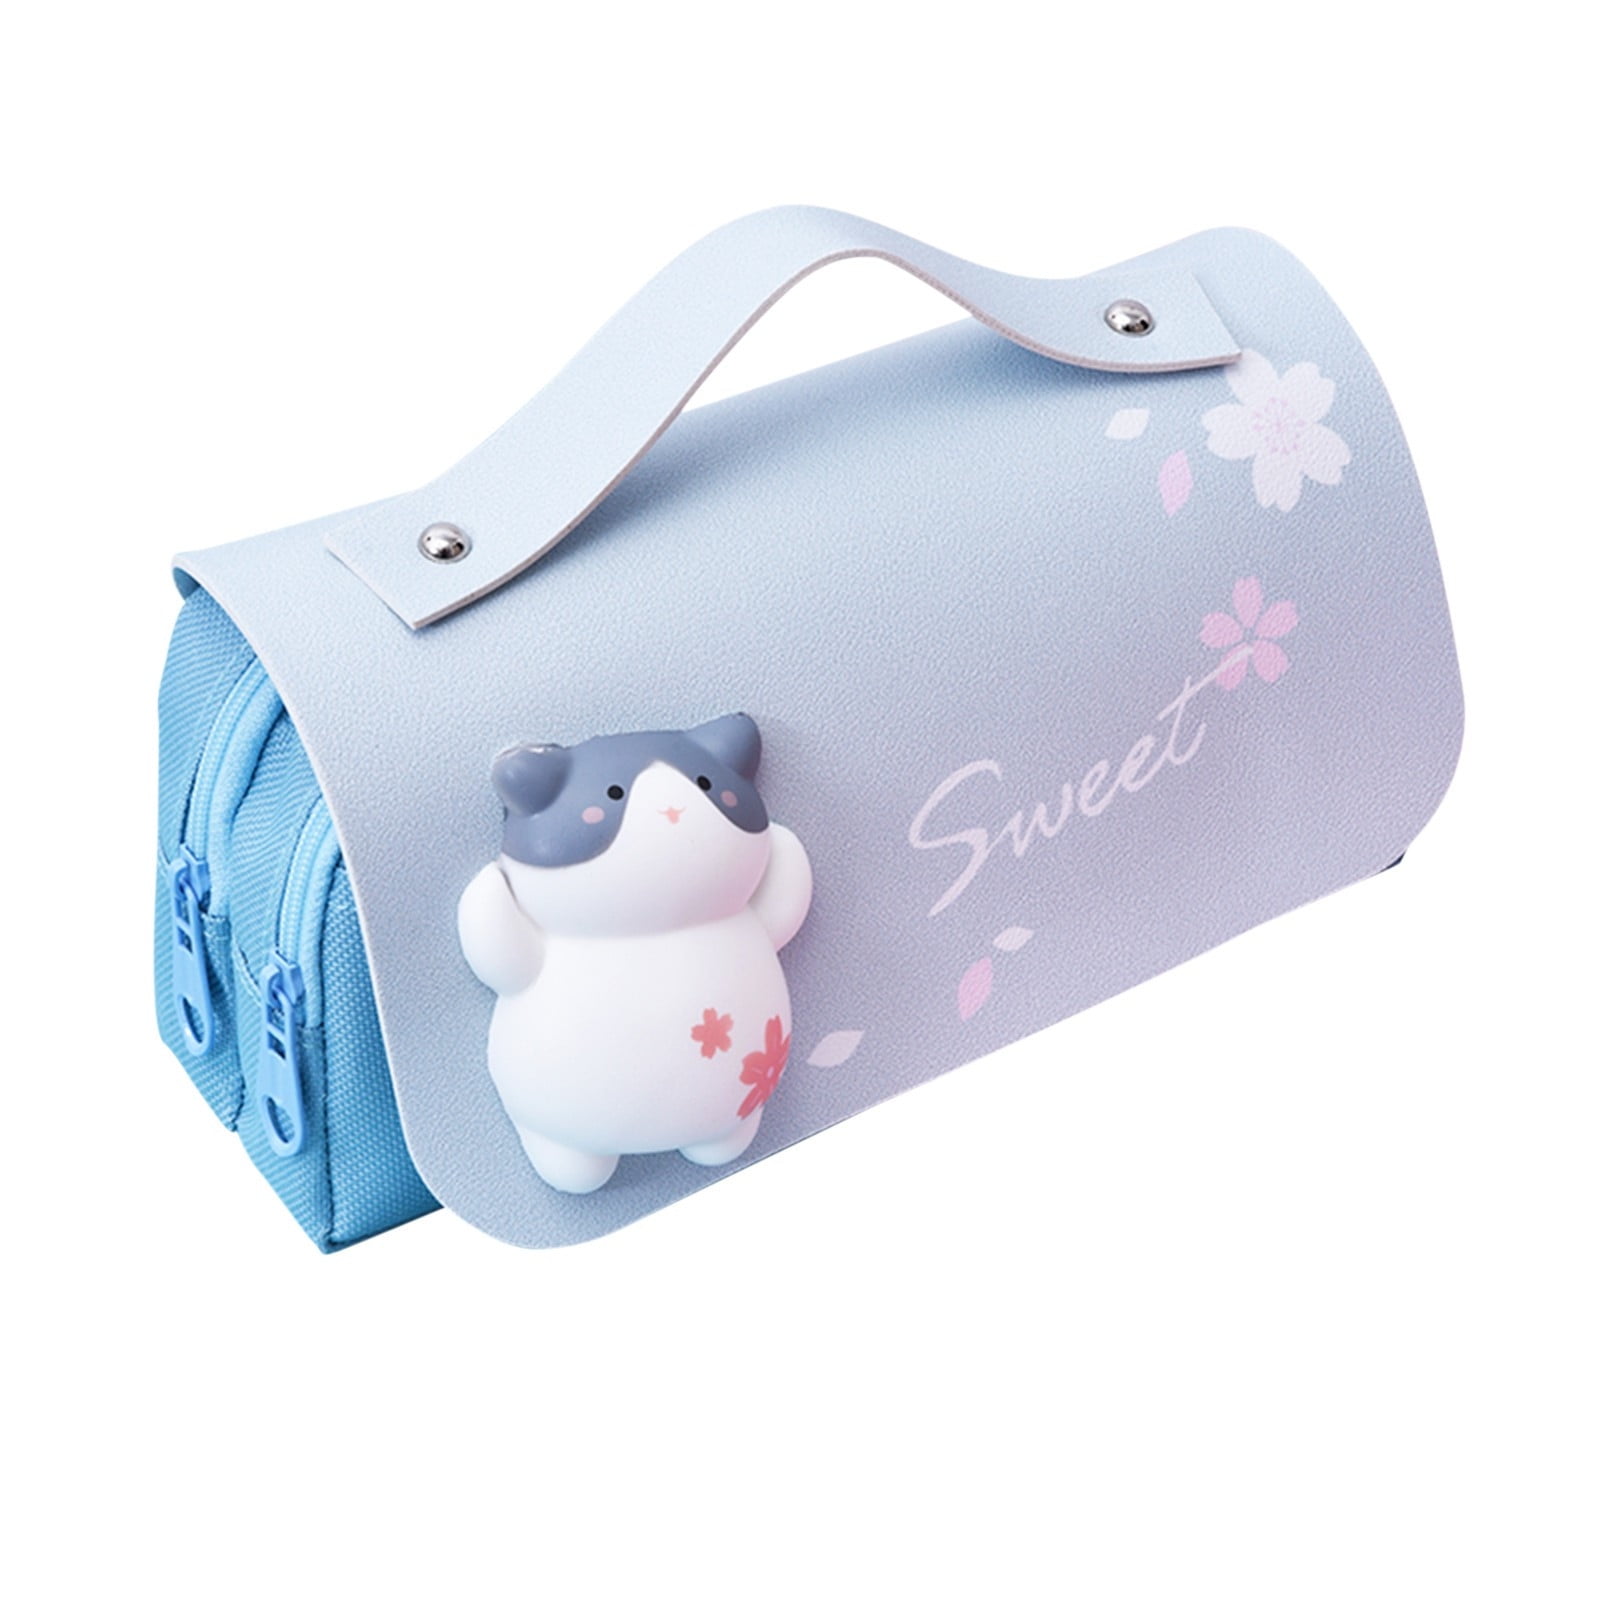 Other Cute Pencil Cases  Pencil Cases Factory - HIGHER GIFTS